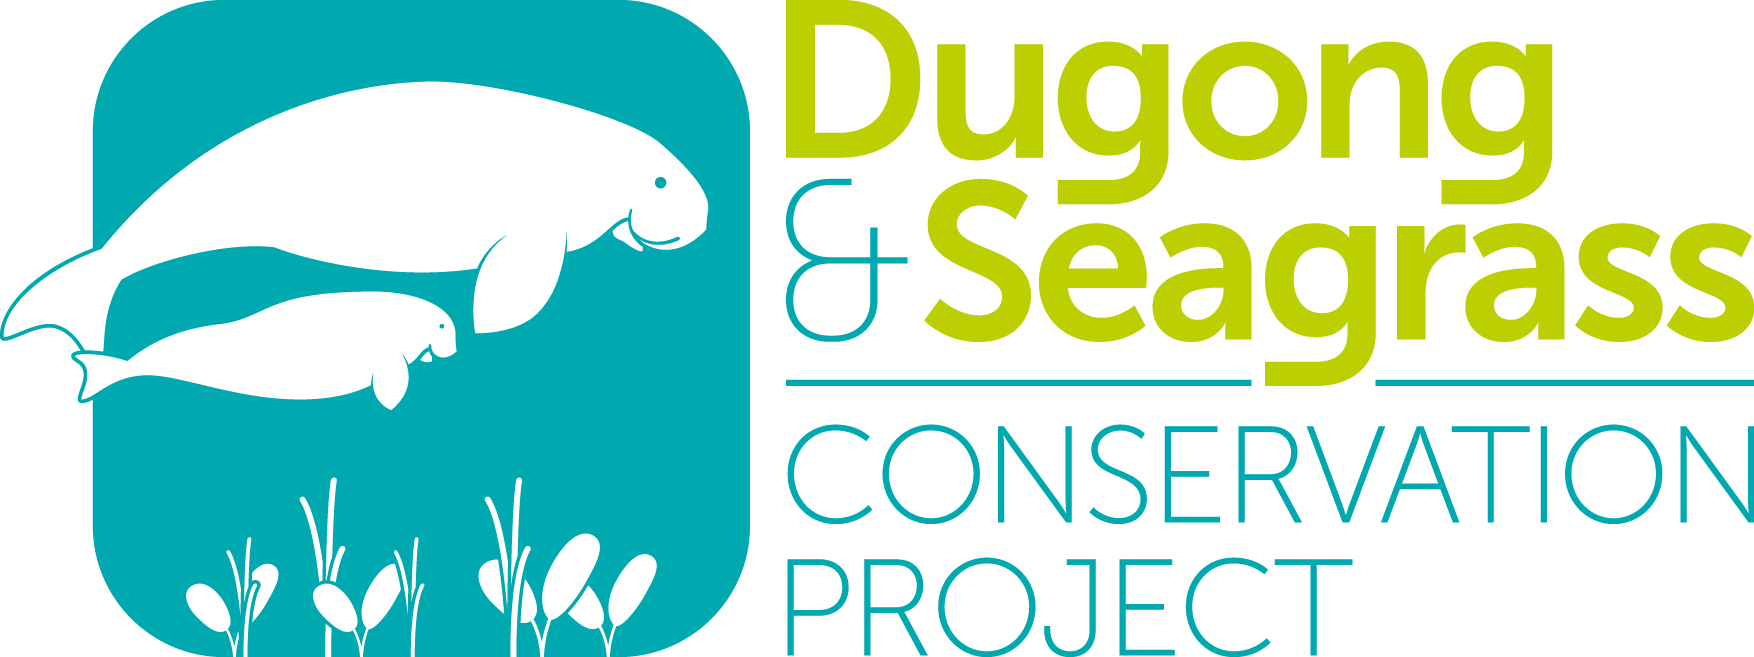 Dugong Logo - 26142201273_171c5e1acd_o Dugong & Seagrass Conservation Project